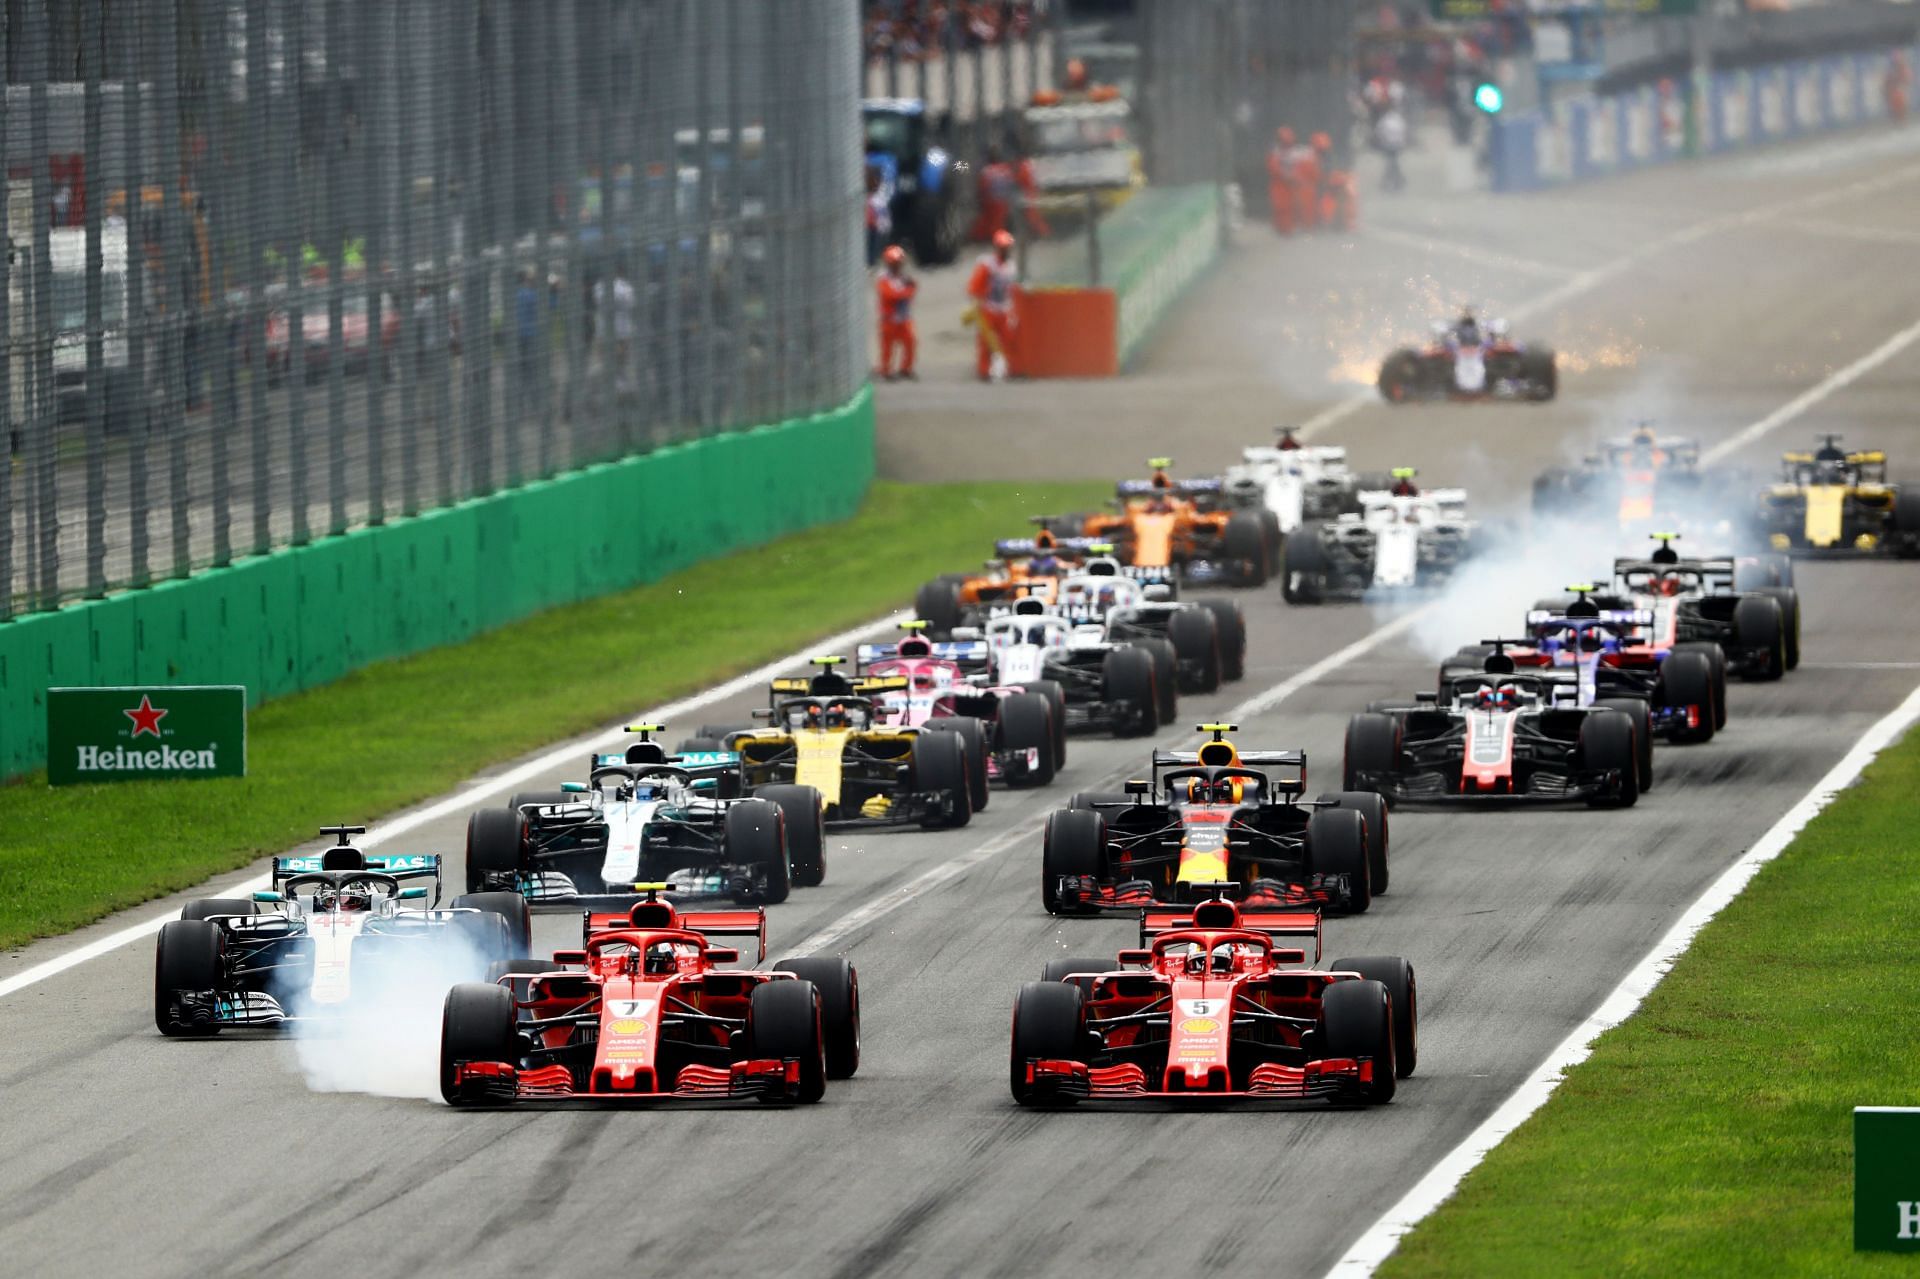 Lewis Hamilton and Max Verstappen had different approaches to wheel-to-wheel combat at the 2018 Italian Grand Prix (Photo by Mark Thompson/Getty Images)